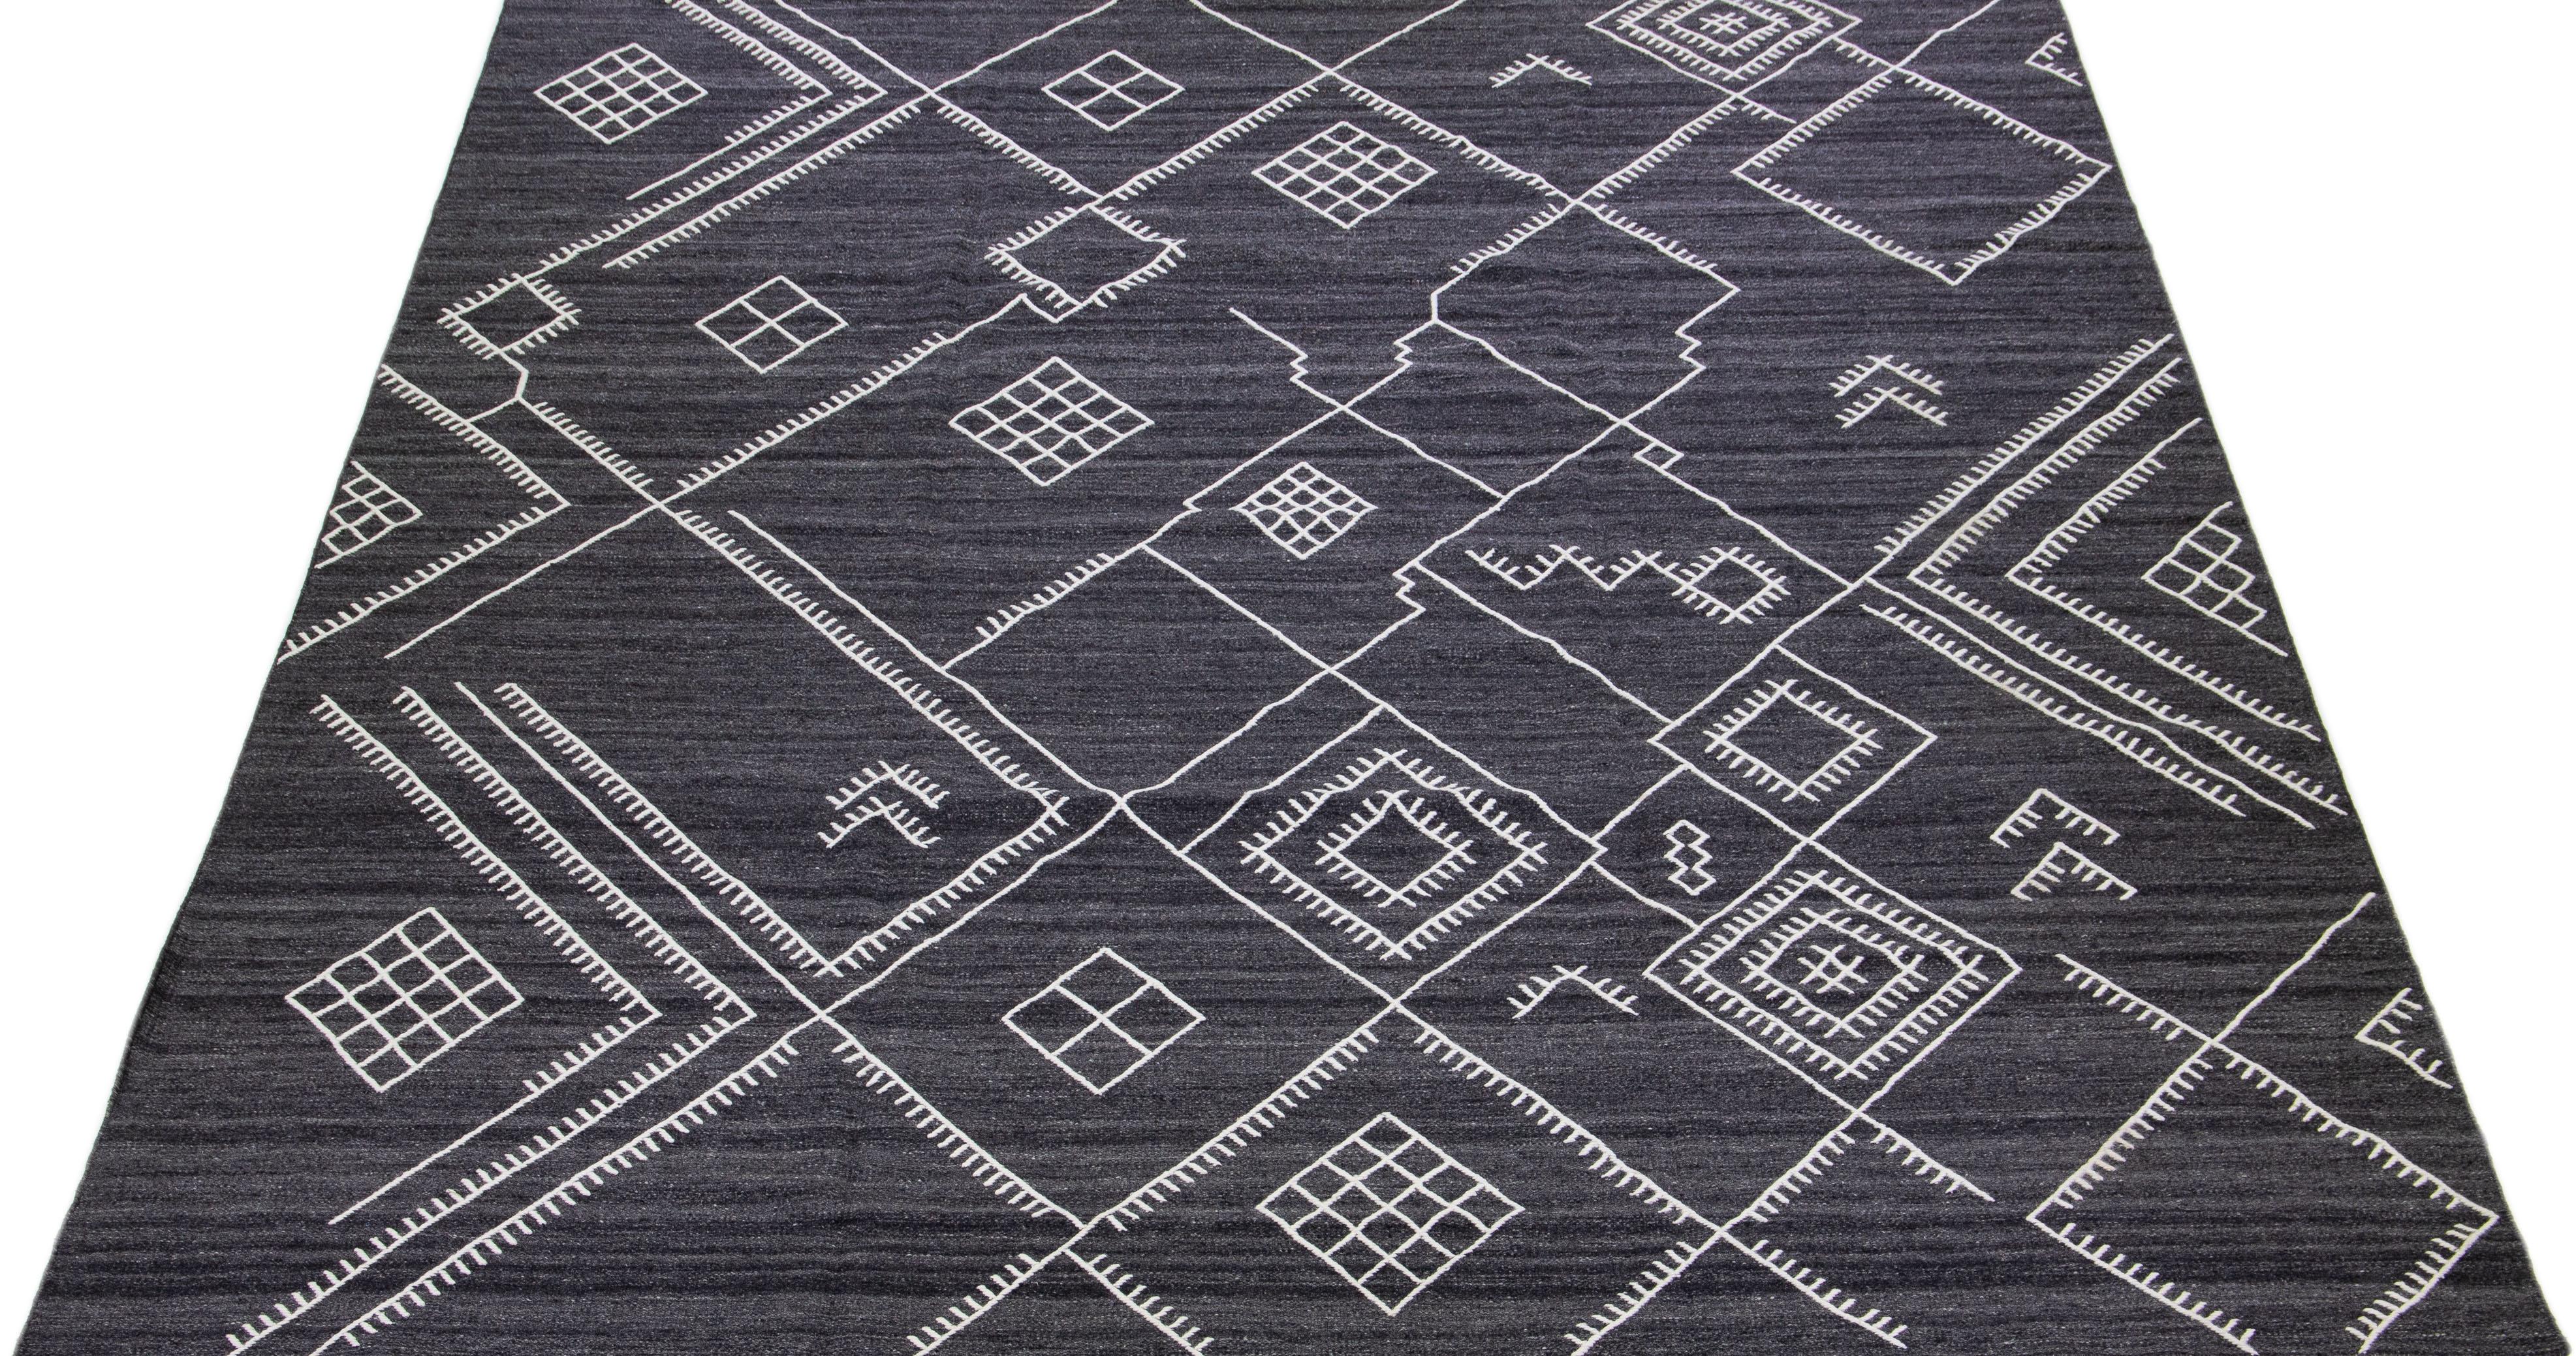 Beautiful kilim handmade wool rug with a gray-charcoal field. This custom modern flatweave rug of our Nantucket collection has white accents and a gorgeous, all-over geometric coastal design.

This rug measures: 12' x 15'.

Our rugs are